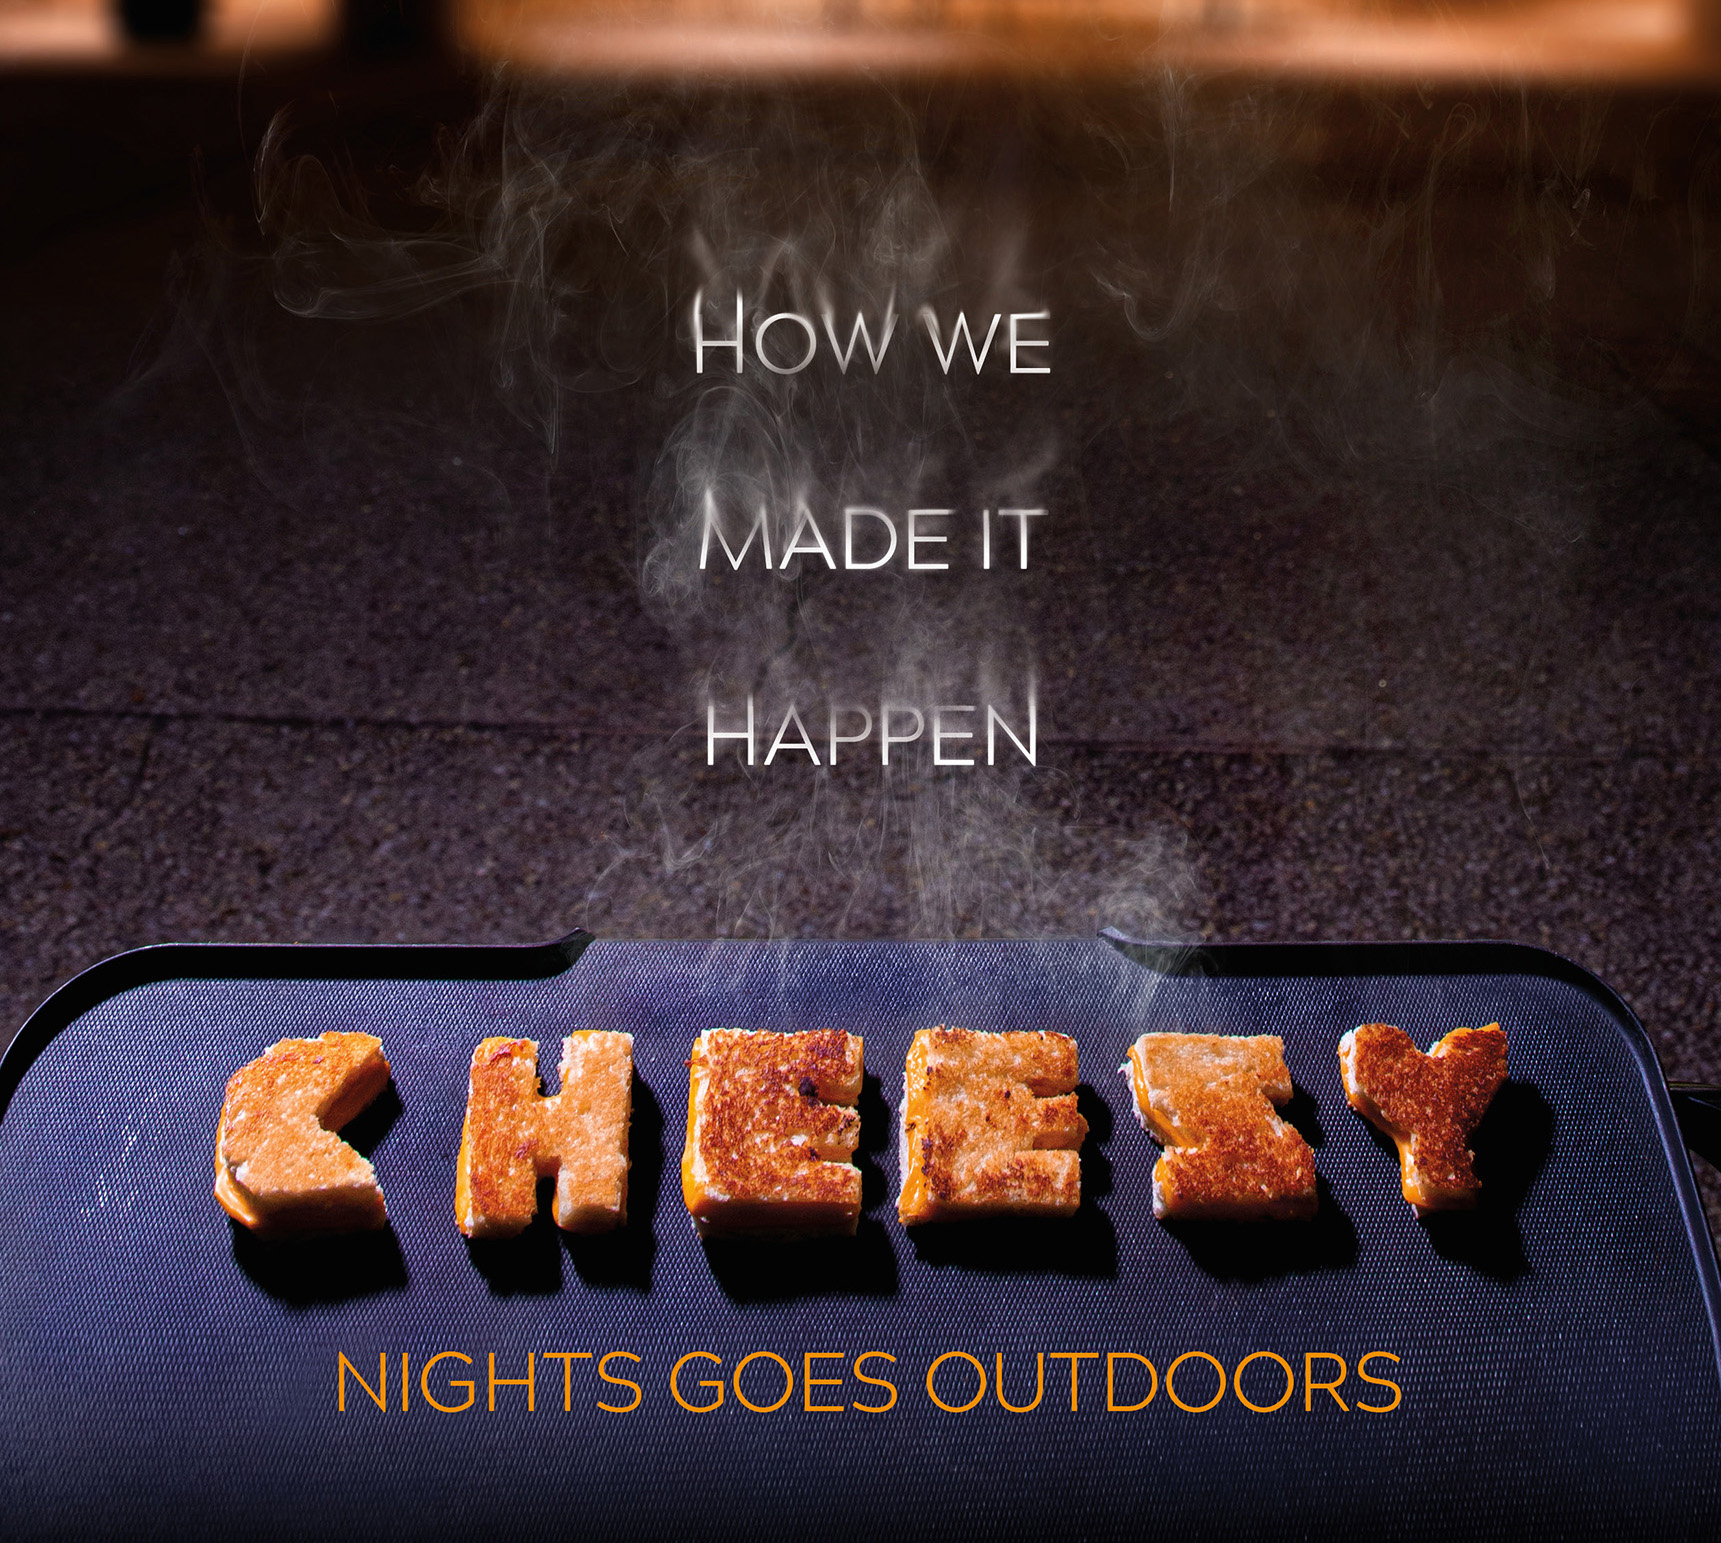 A grill outside Newman Library at night with grilled cheese cut into the word "Cheesy.” Text floats in the steam and on the griddle, “How we made it happen, Cheesy nights goes outdoors.”